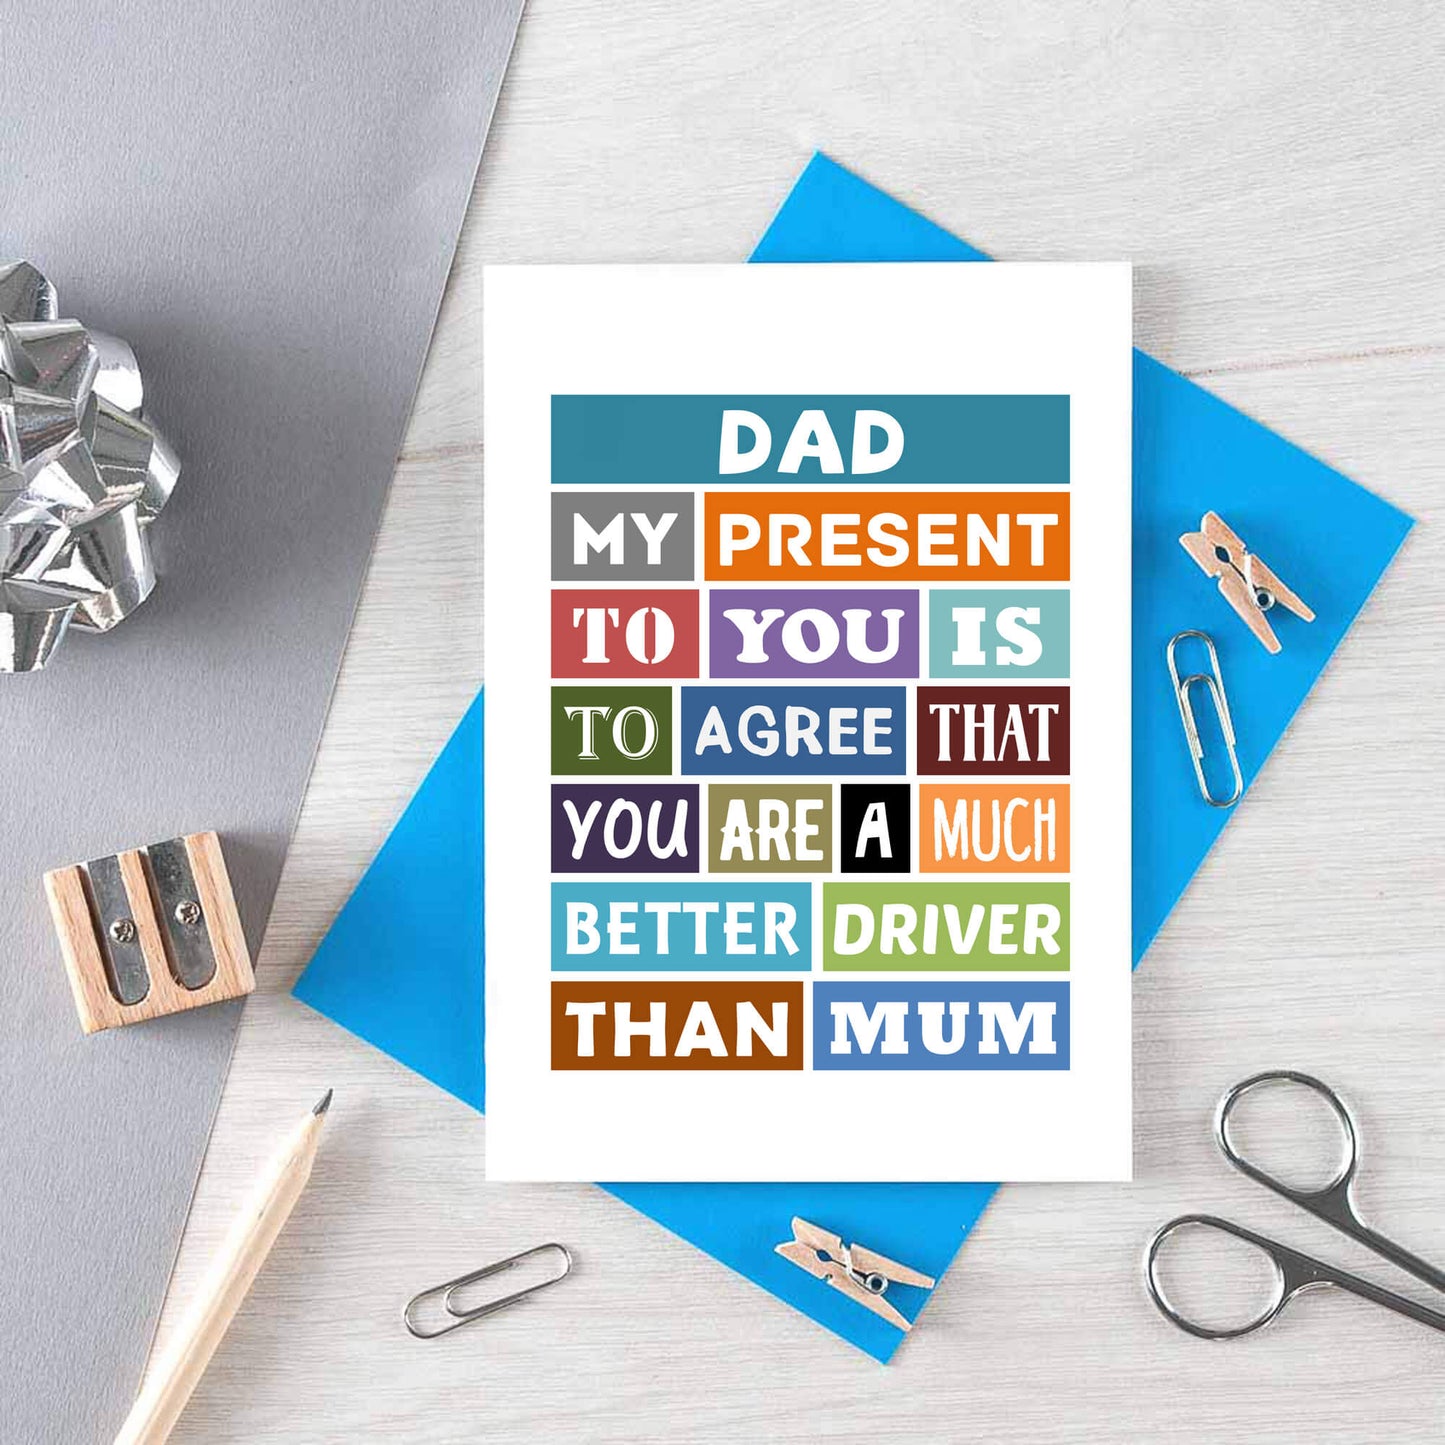 Dad Birthday Card by SixElevenCreations. Reads Dad My present to you is to agree that you are a much better driver than mum. Product Code SE0125A6